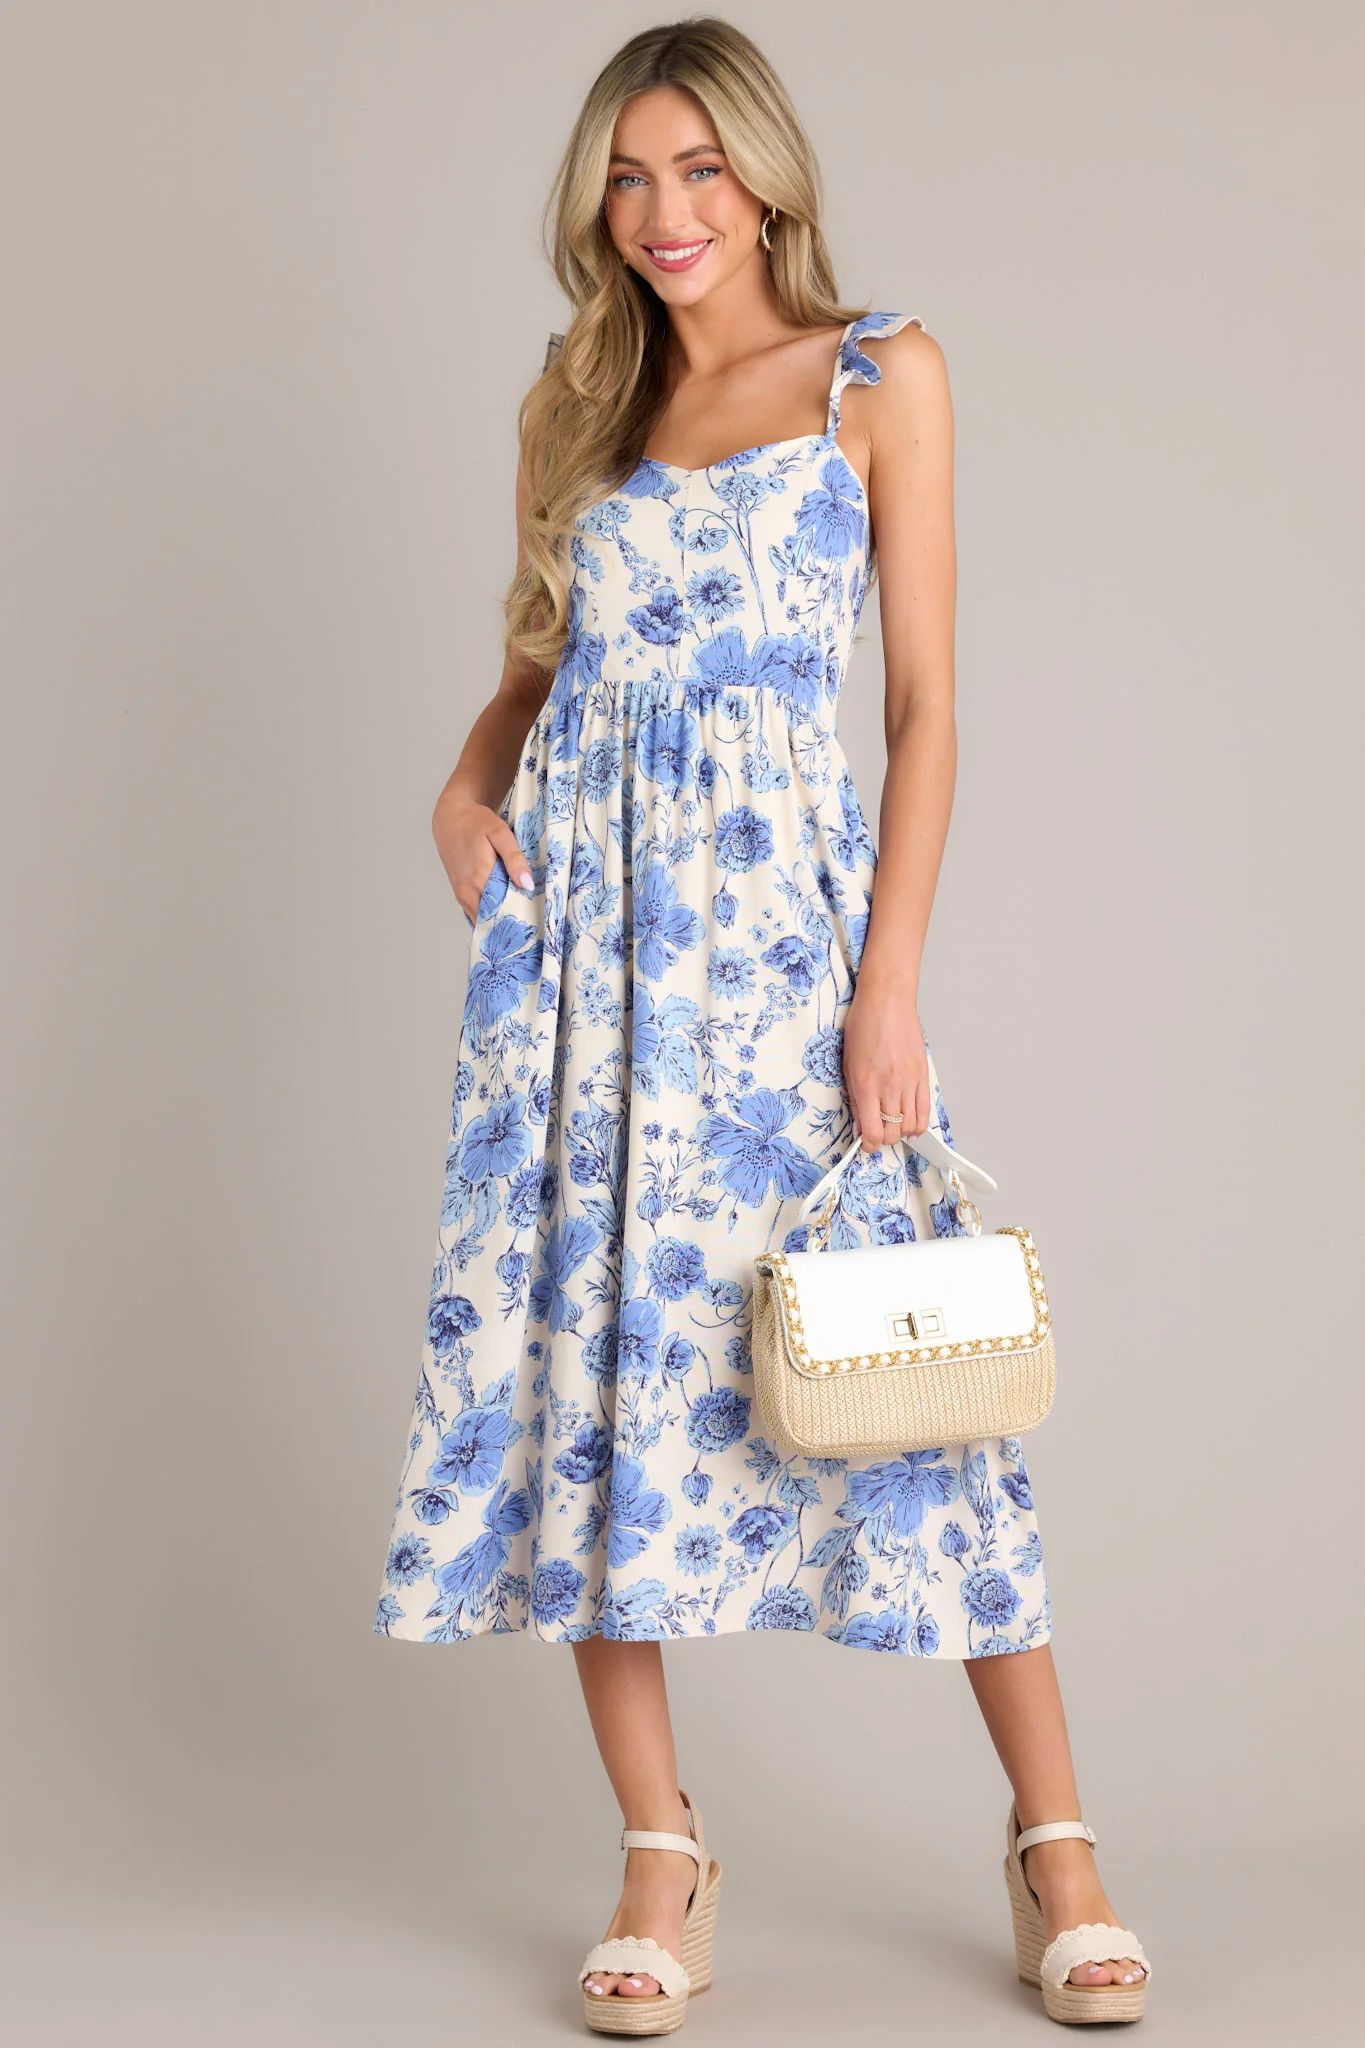 Blossoms Of Belief Ivory & Blue Floral Midi Dress | Red Dress